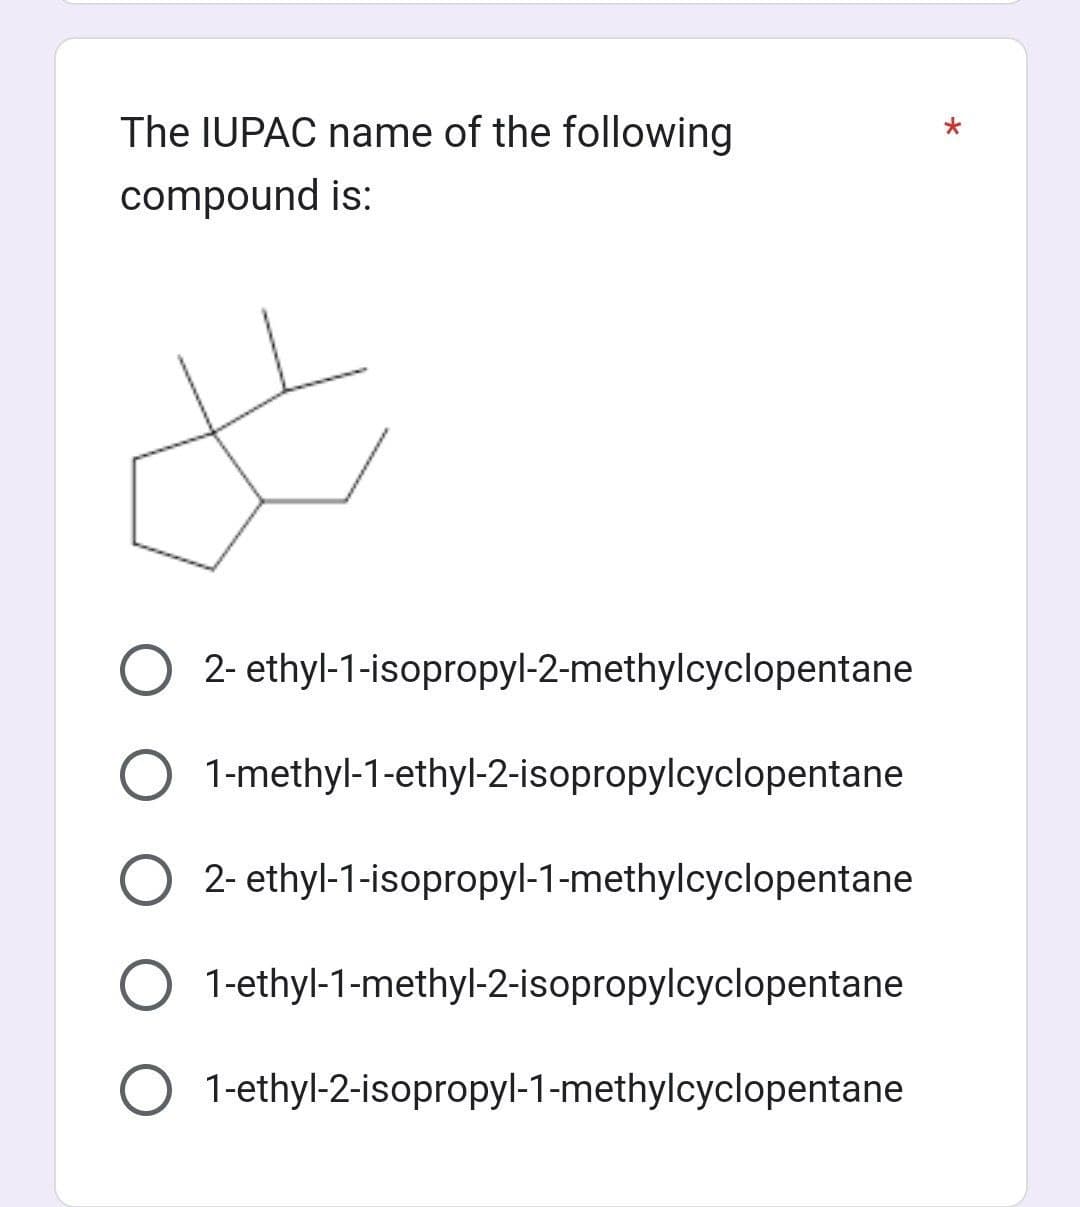 The IUPAC name of the following
compound is:
#
O2- ethyl-1-isopropyl-2-methylcyclopentane
1-methyl-1-ethyl-2-isopropylcyclopentane
2- ethyl-1-isopropyl-1-methylcyclopentane
1-ethyl-1-methyl-2-isopropylcyclopentane
1-ethyl-2-isopropyl-1-methylcyclopentane
*